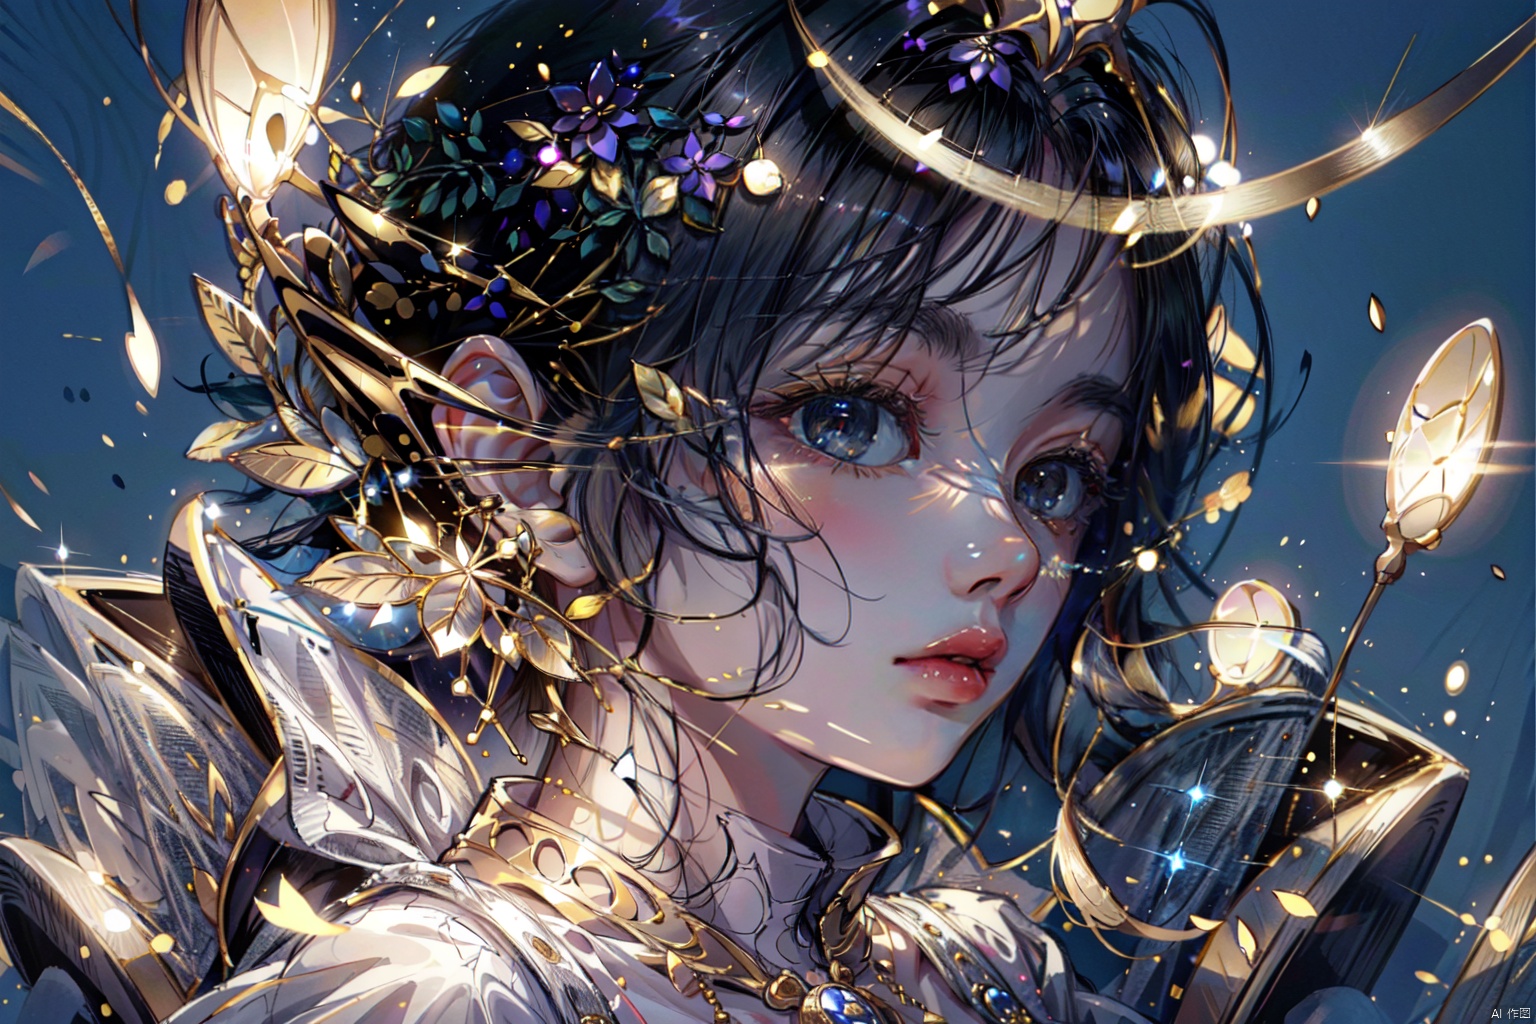 (Masterpiece) (The Master's) (Drawing) (Hair Drawing) (Fine Drawing of Eyes) (Fine Drawing of Face) (Fine Drawing of Human Body) (Beautiful Girl) (Quadratic) Dynamic, Fine CG, exquisite illustration, 1 girl, hand refinement, broken glass, divinity, prayer, gentleness, clarity, beauty, ambience, more detail, soft light and shadow, broken and beautiful, gray tone, silver, gold